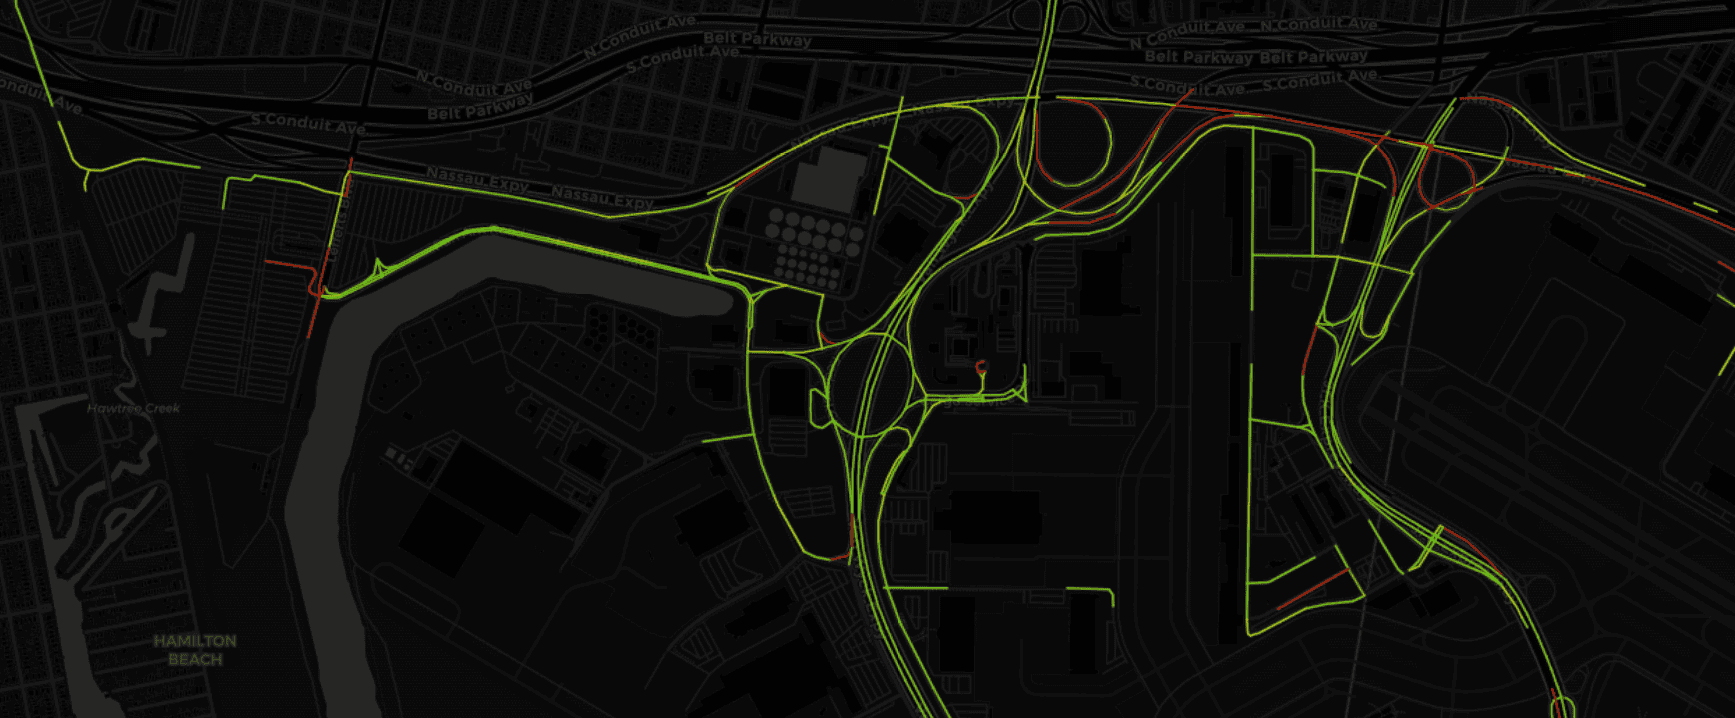 A map displaying routes highlighted in green and red overlays on a dark background, indicating traffic flow and road layout in an urban area.